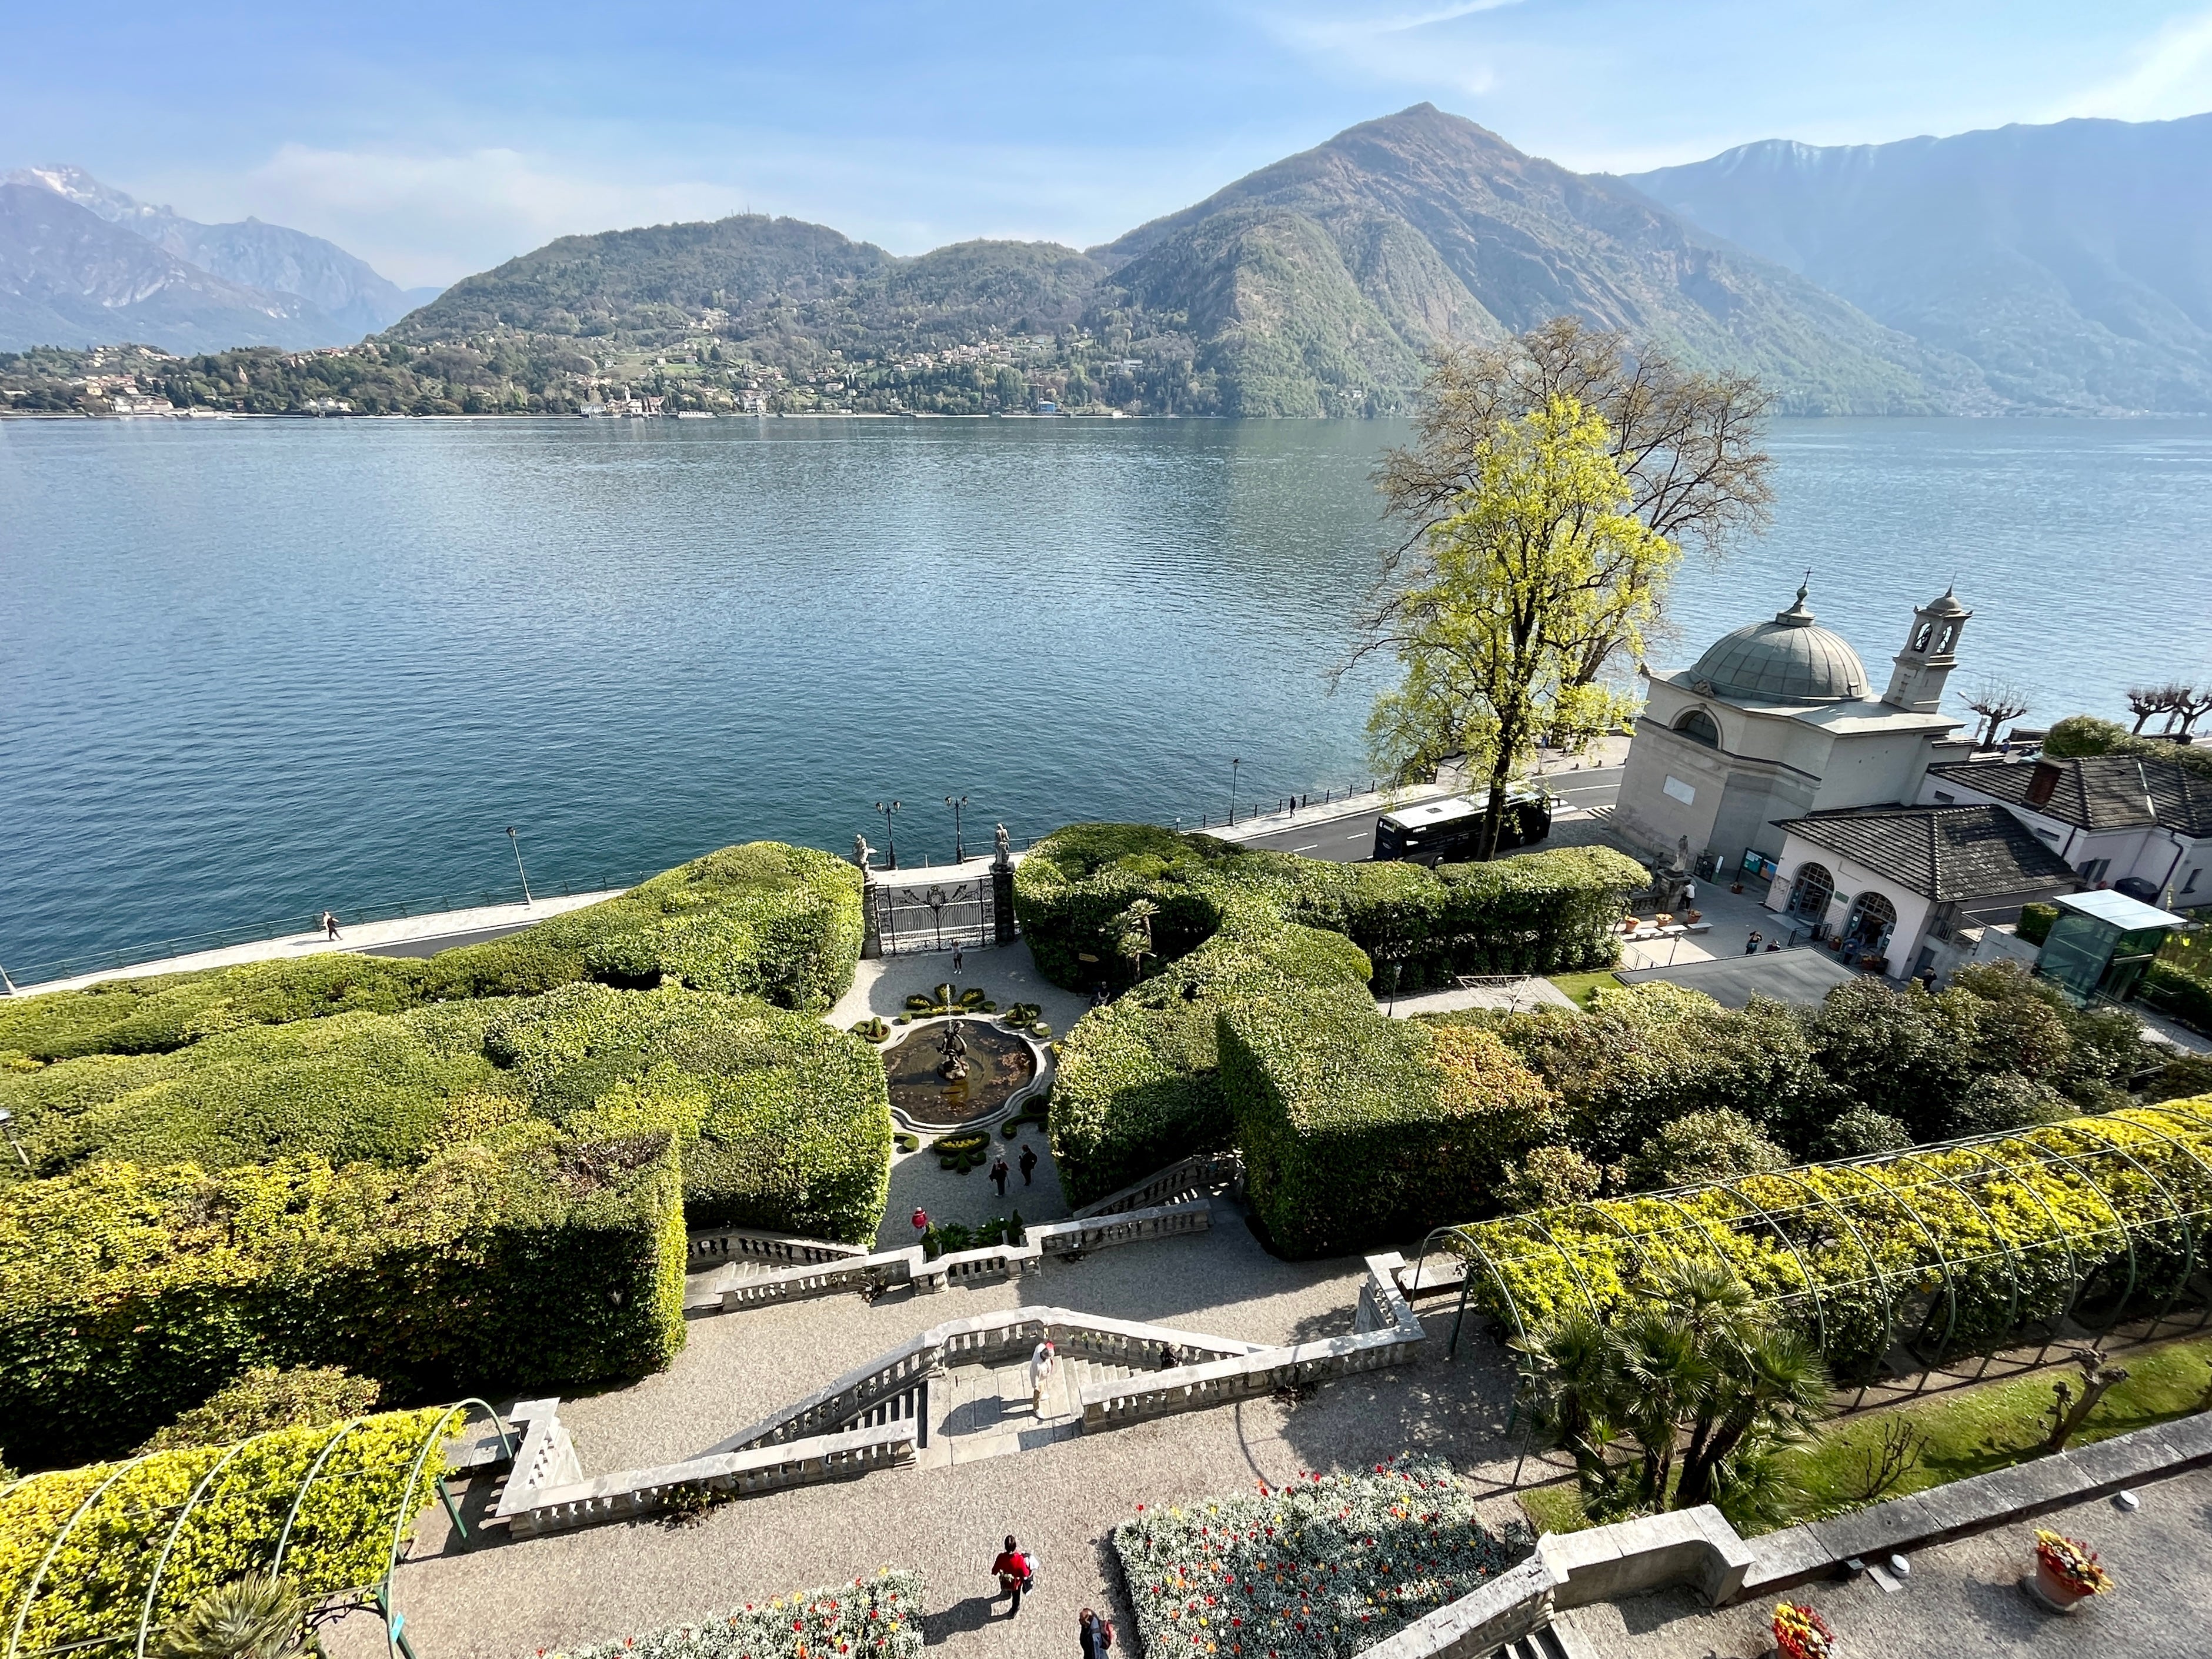 By George: View from Villa Carlotta on Lake Como